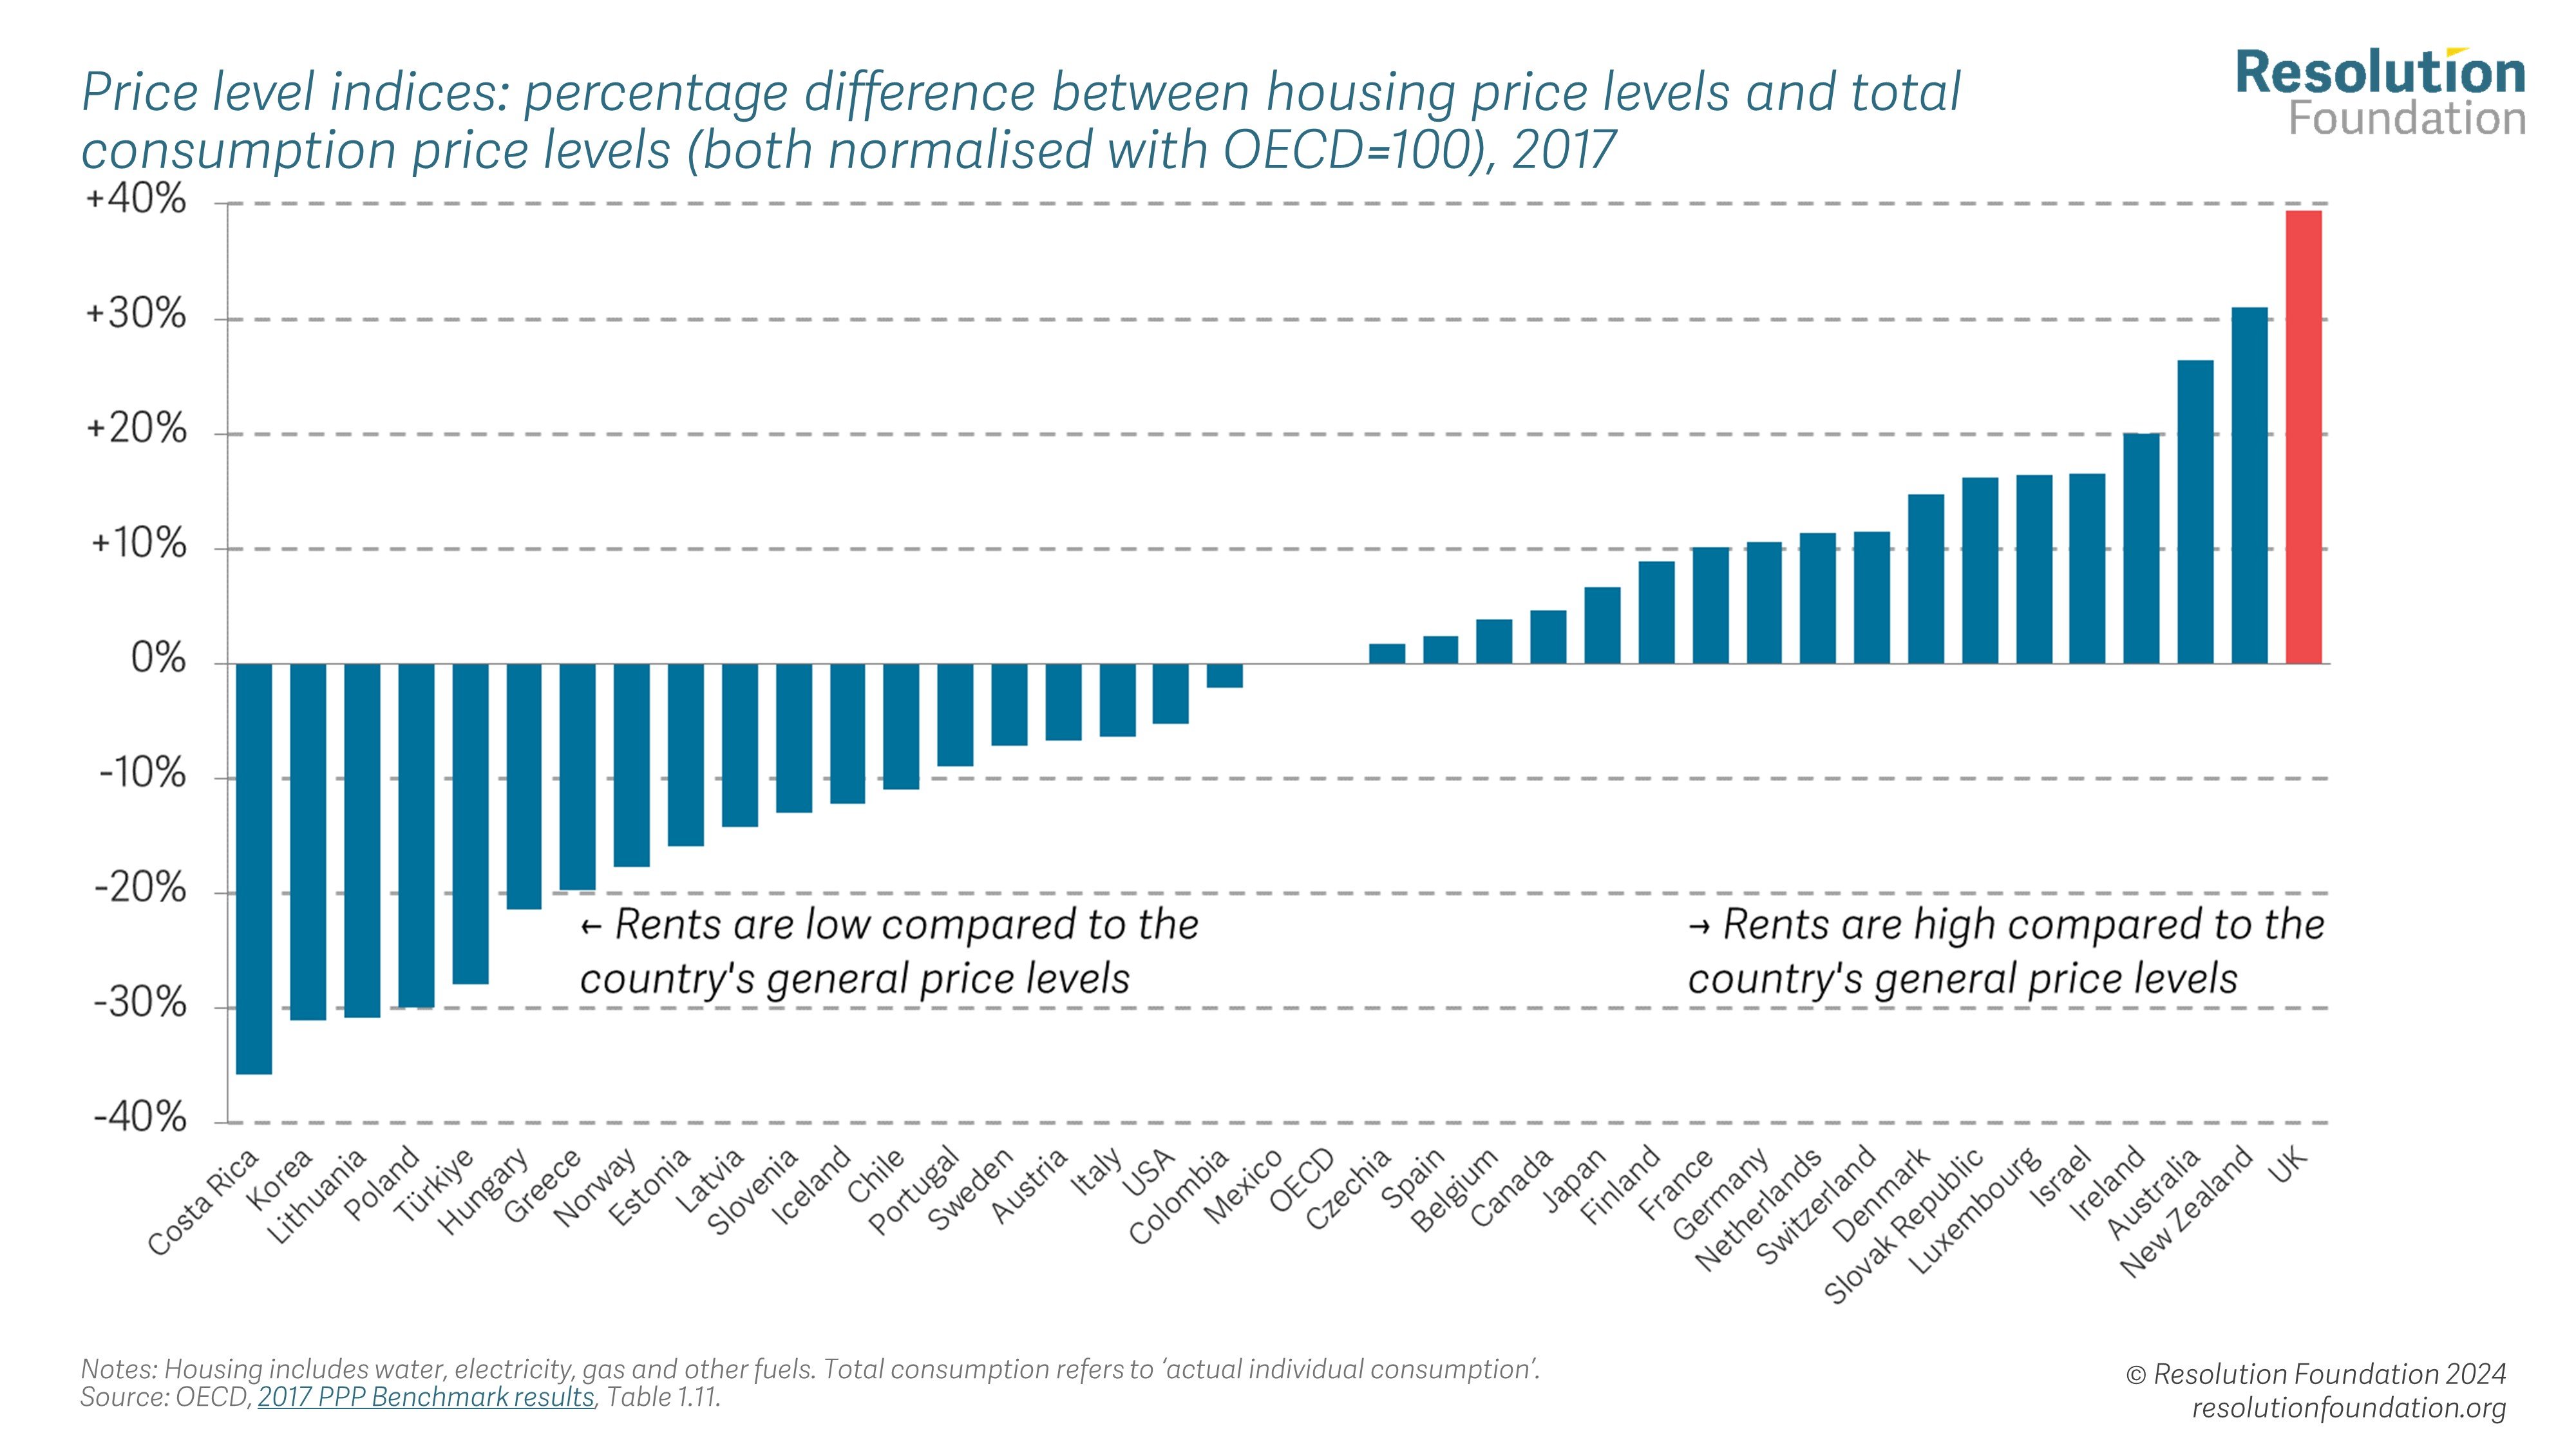 UK households pay more for less compared to advanced economies